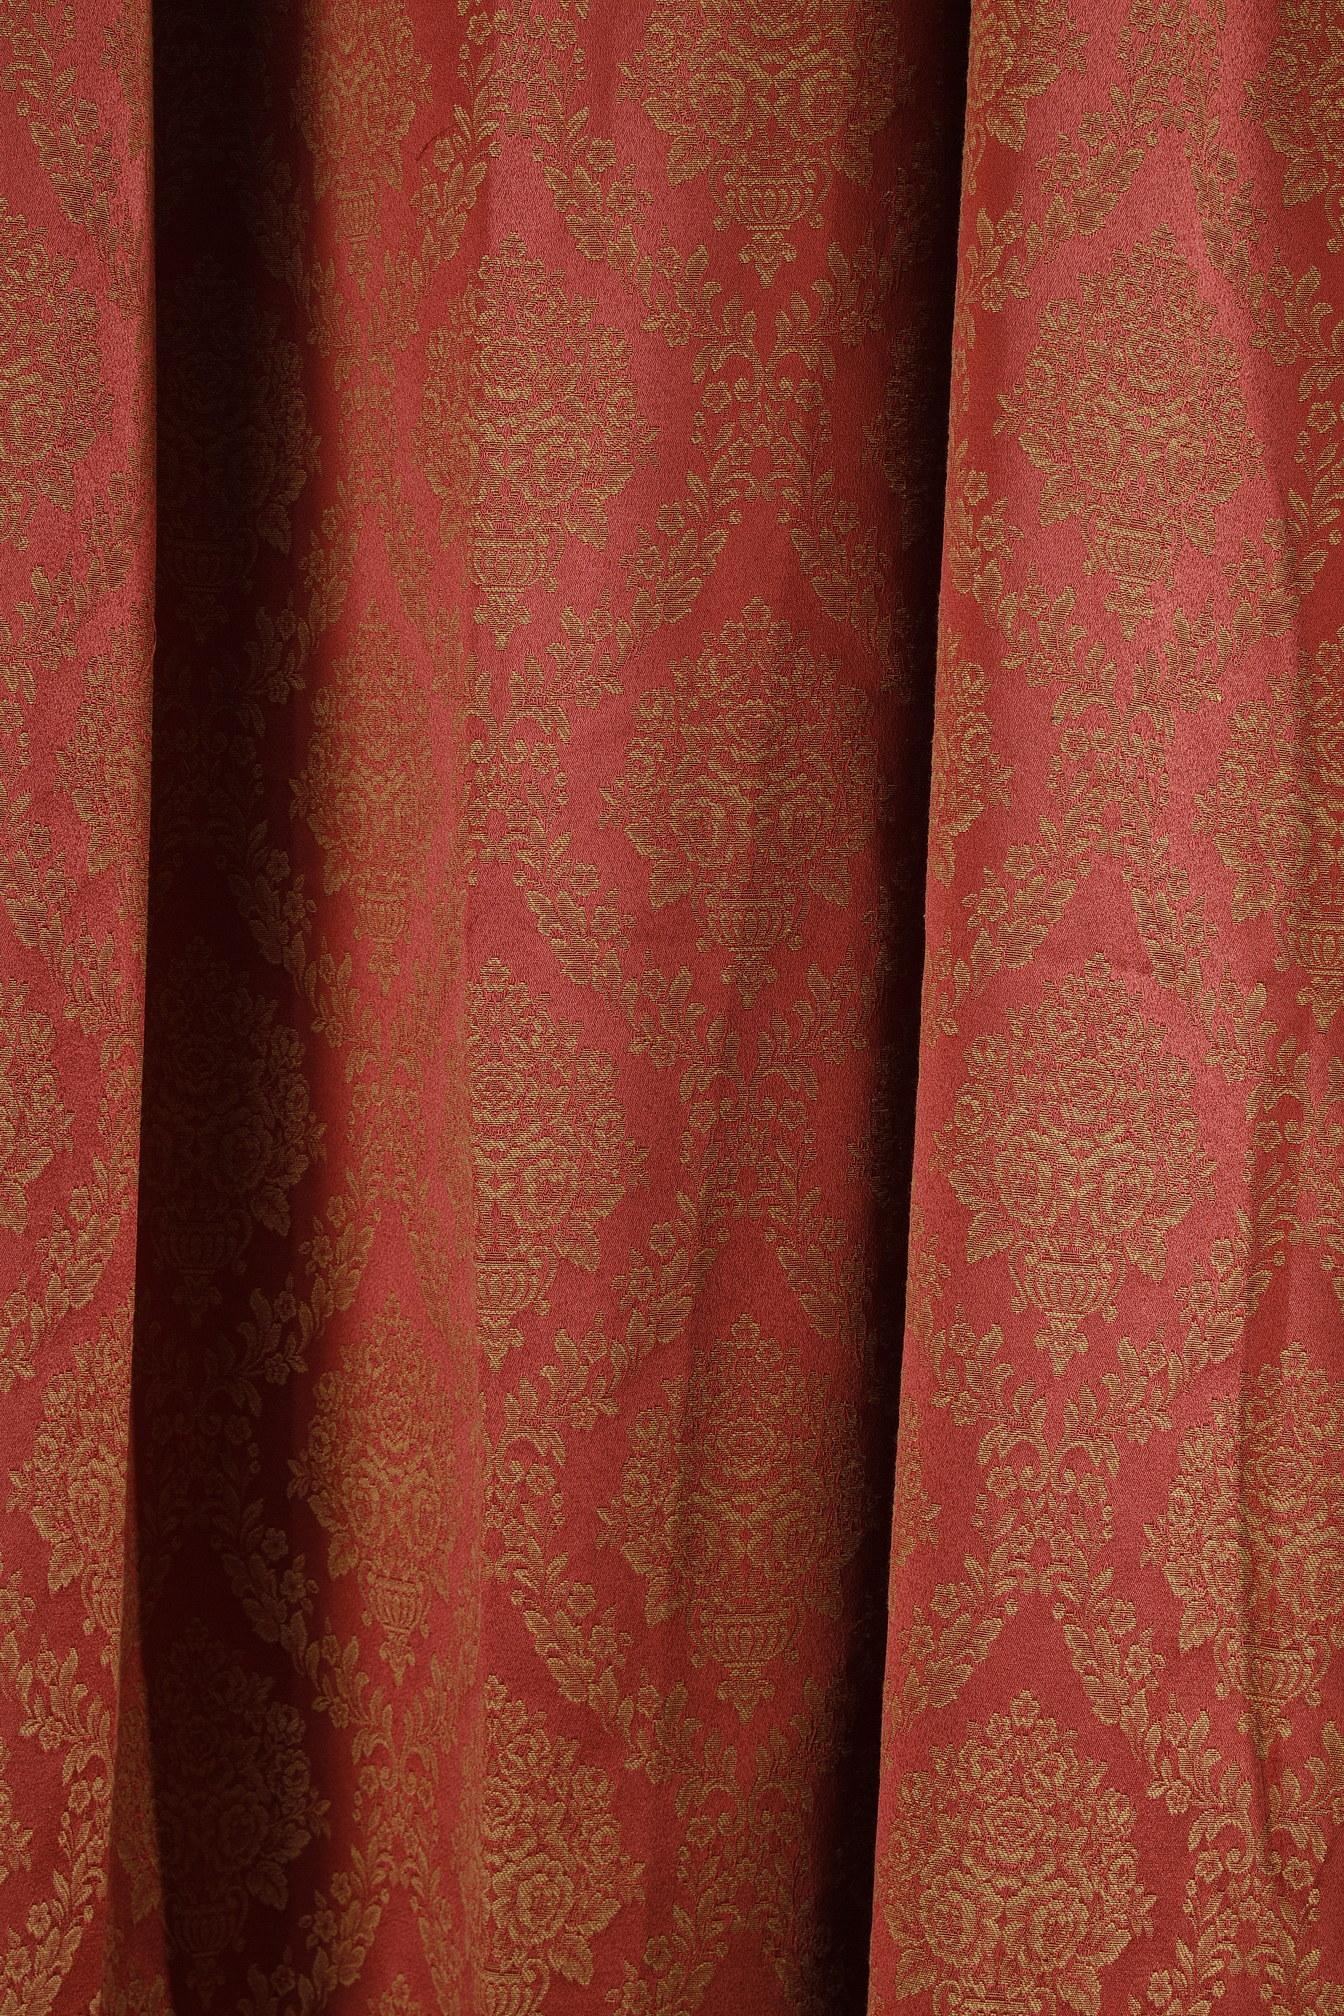 Pair of curtains and its valance surmounted by a gilded moulded wood banister. The curtains are made of red brocade fabric with decorations of vases overflowing with flowers in rhombus-shaped vegetal friezes. The valance with scalloped edge is made